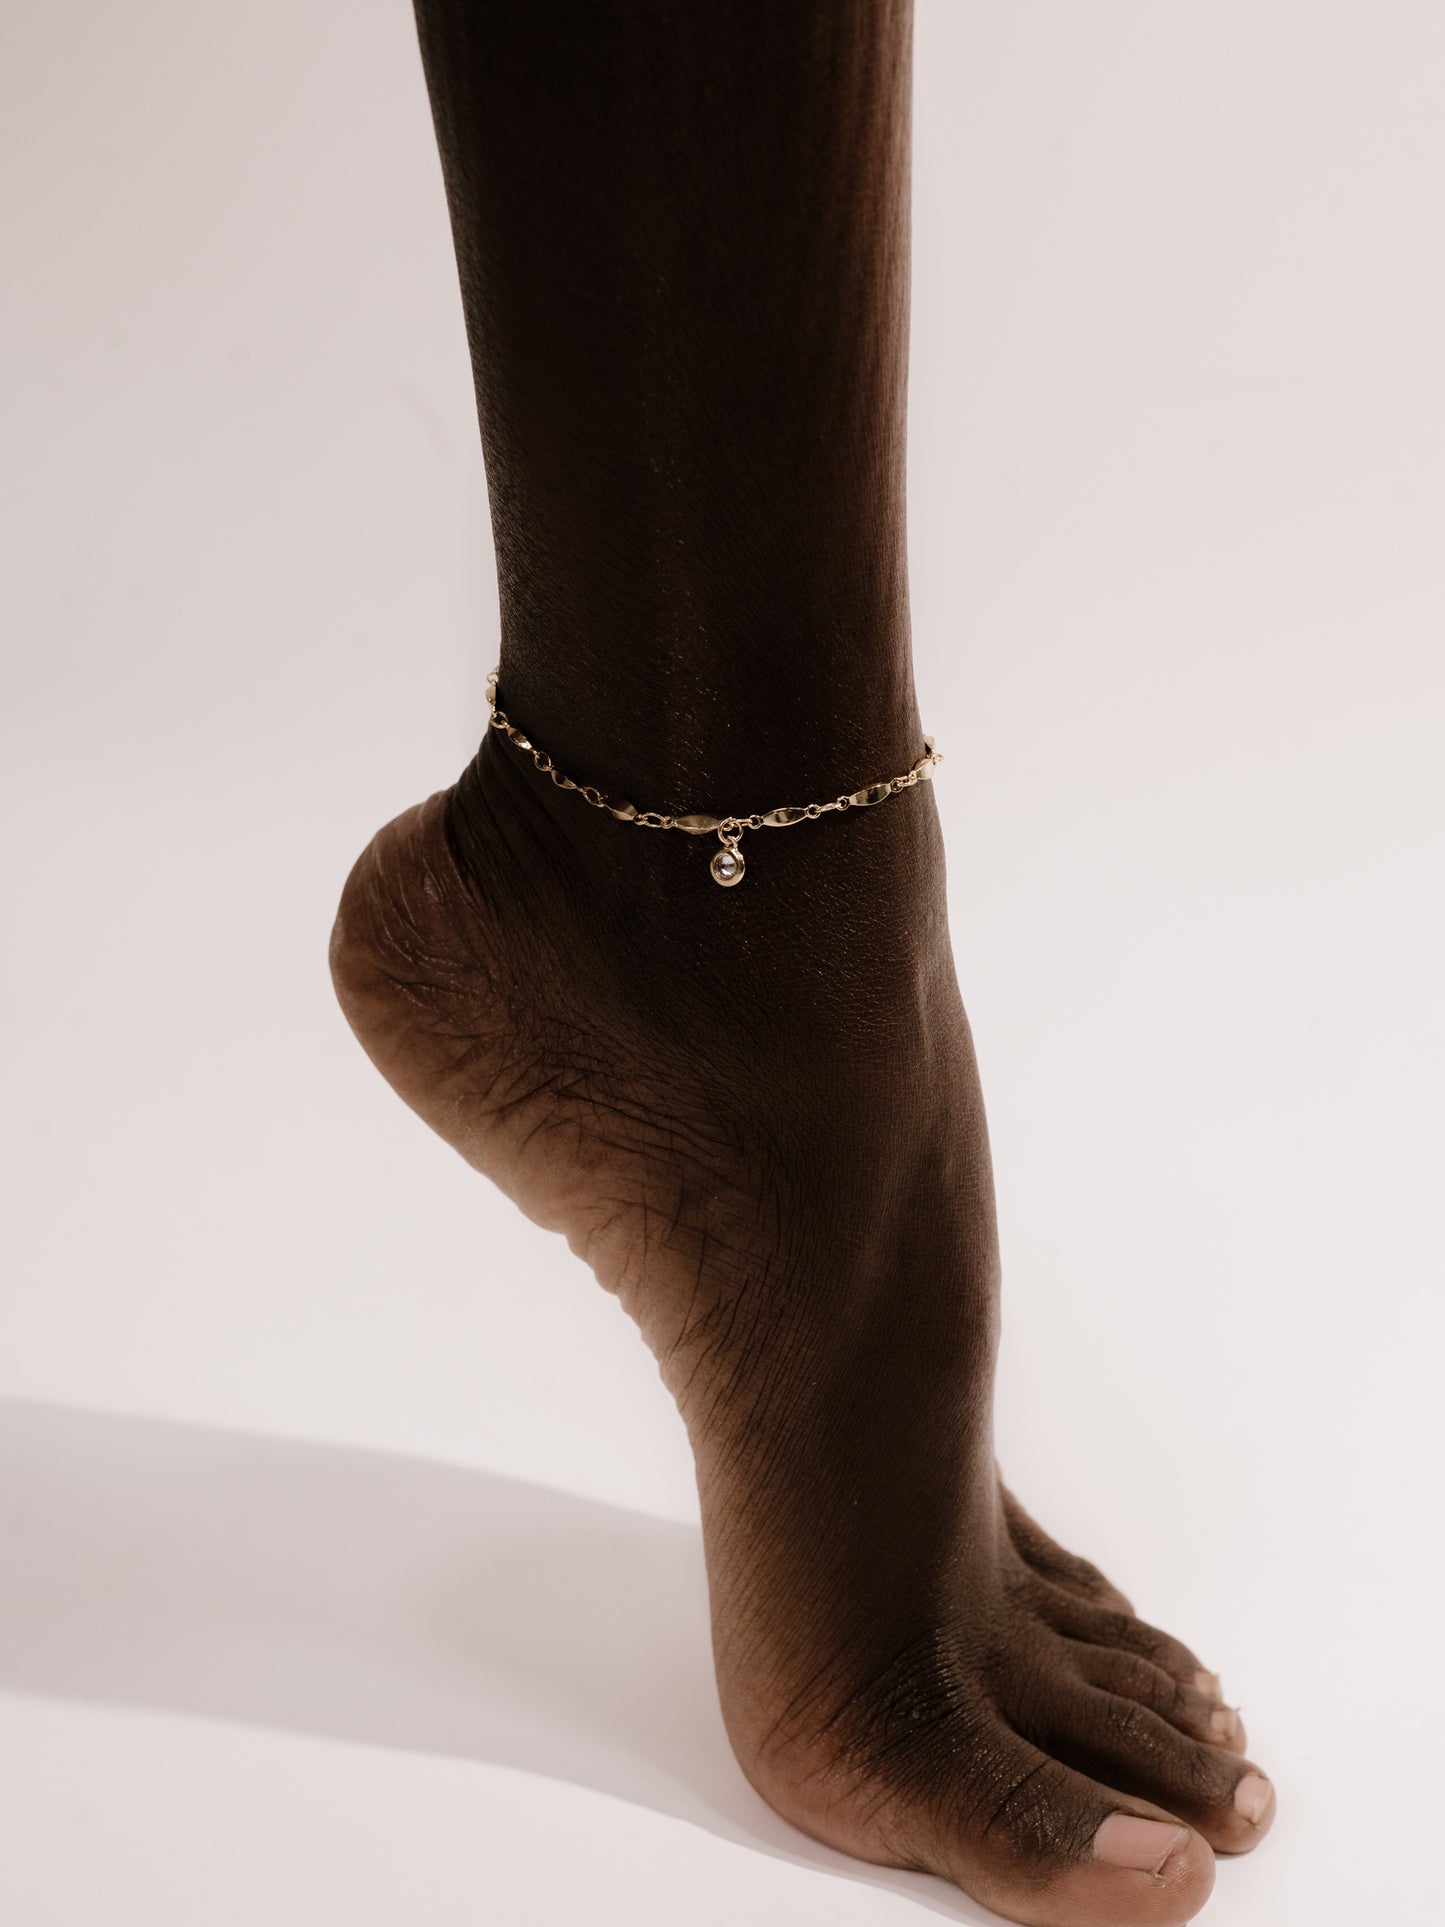 Day Dreamer Anklet with Crystal Charm on model